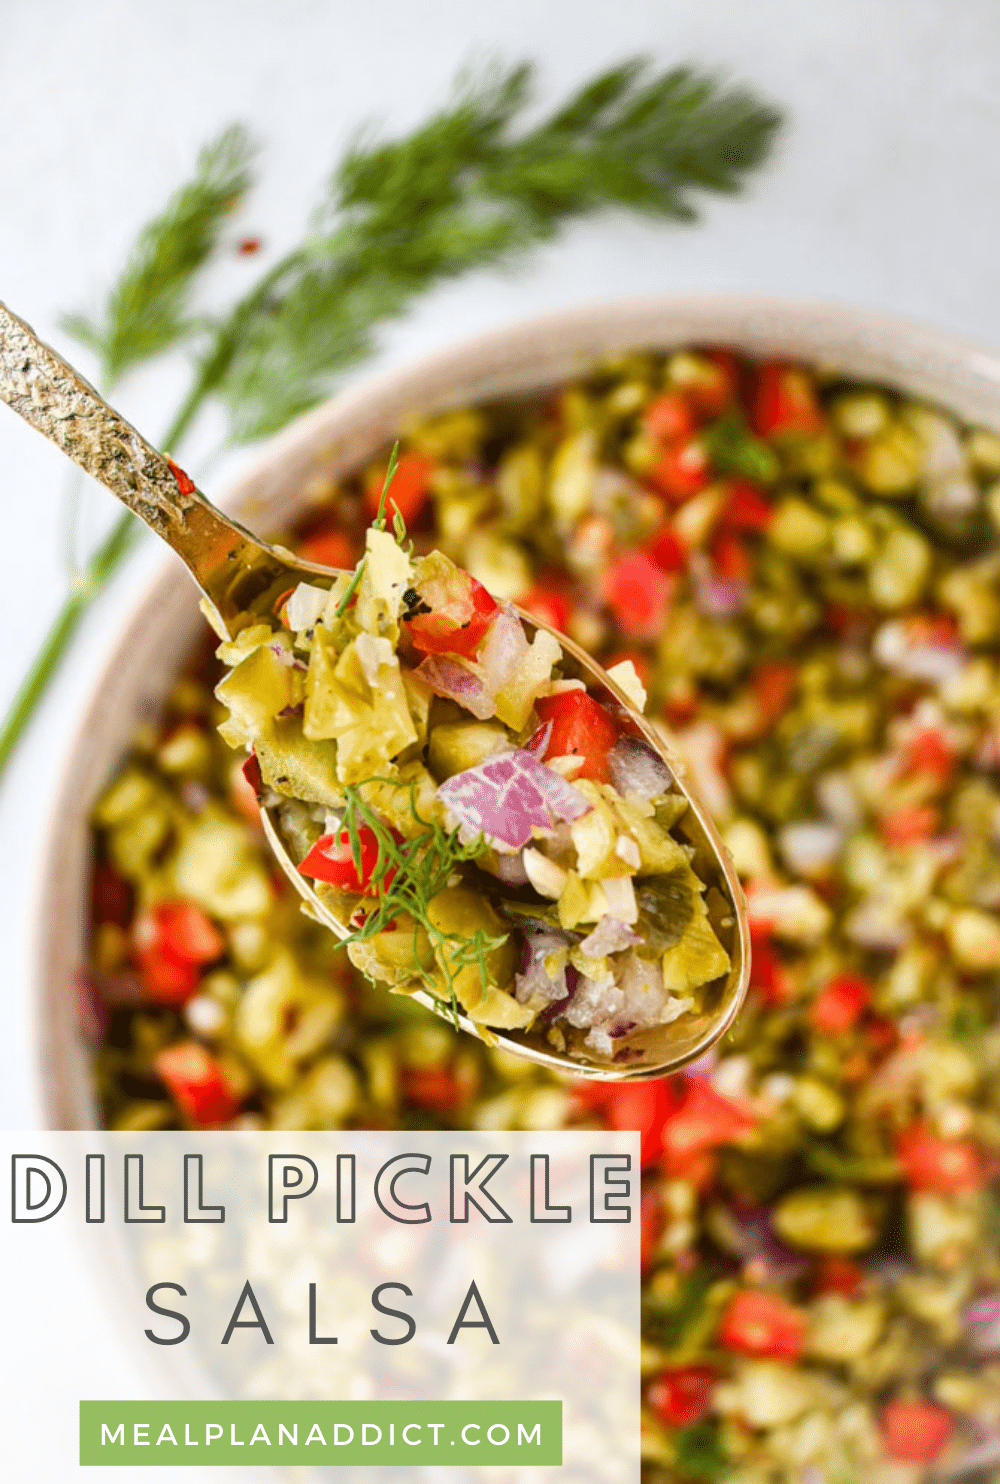 Easy and Delicious Dill Pickle Salsa | Meal Plan Addict